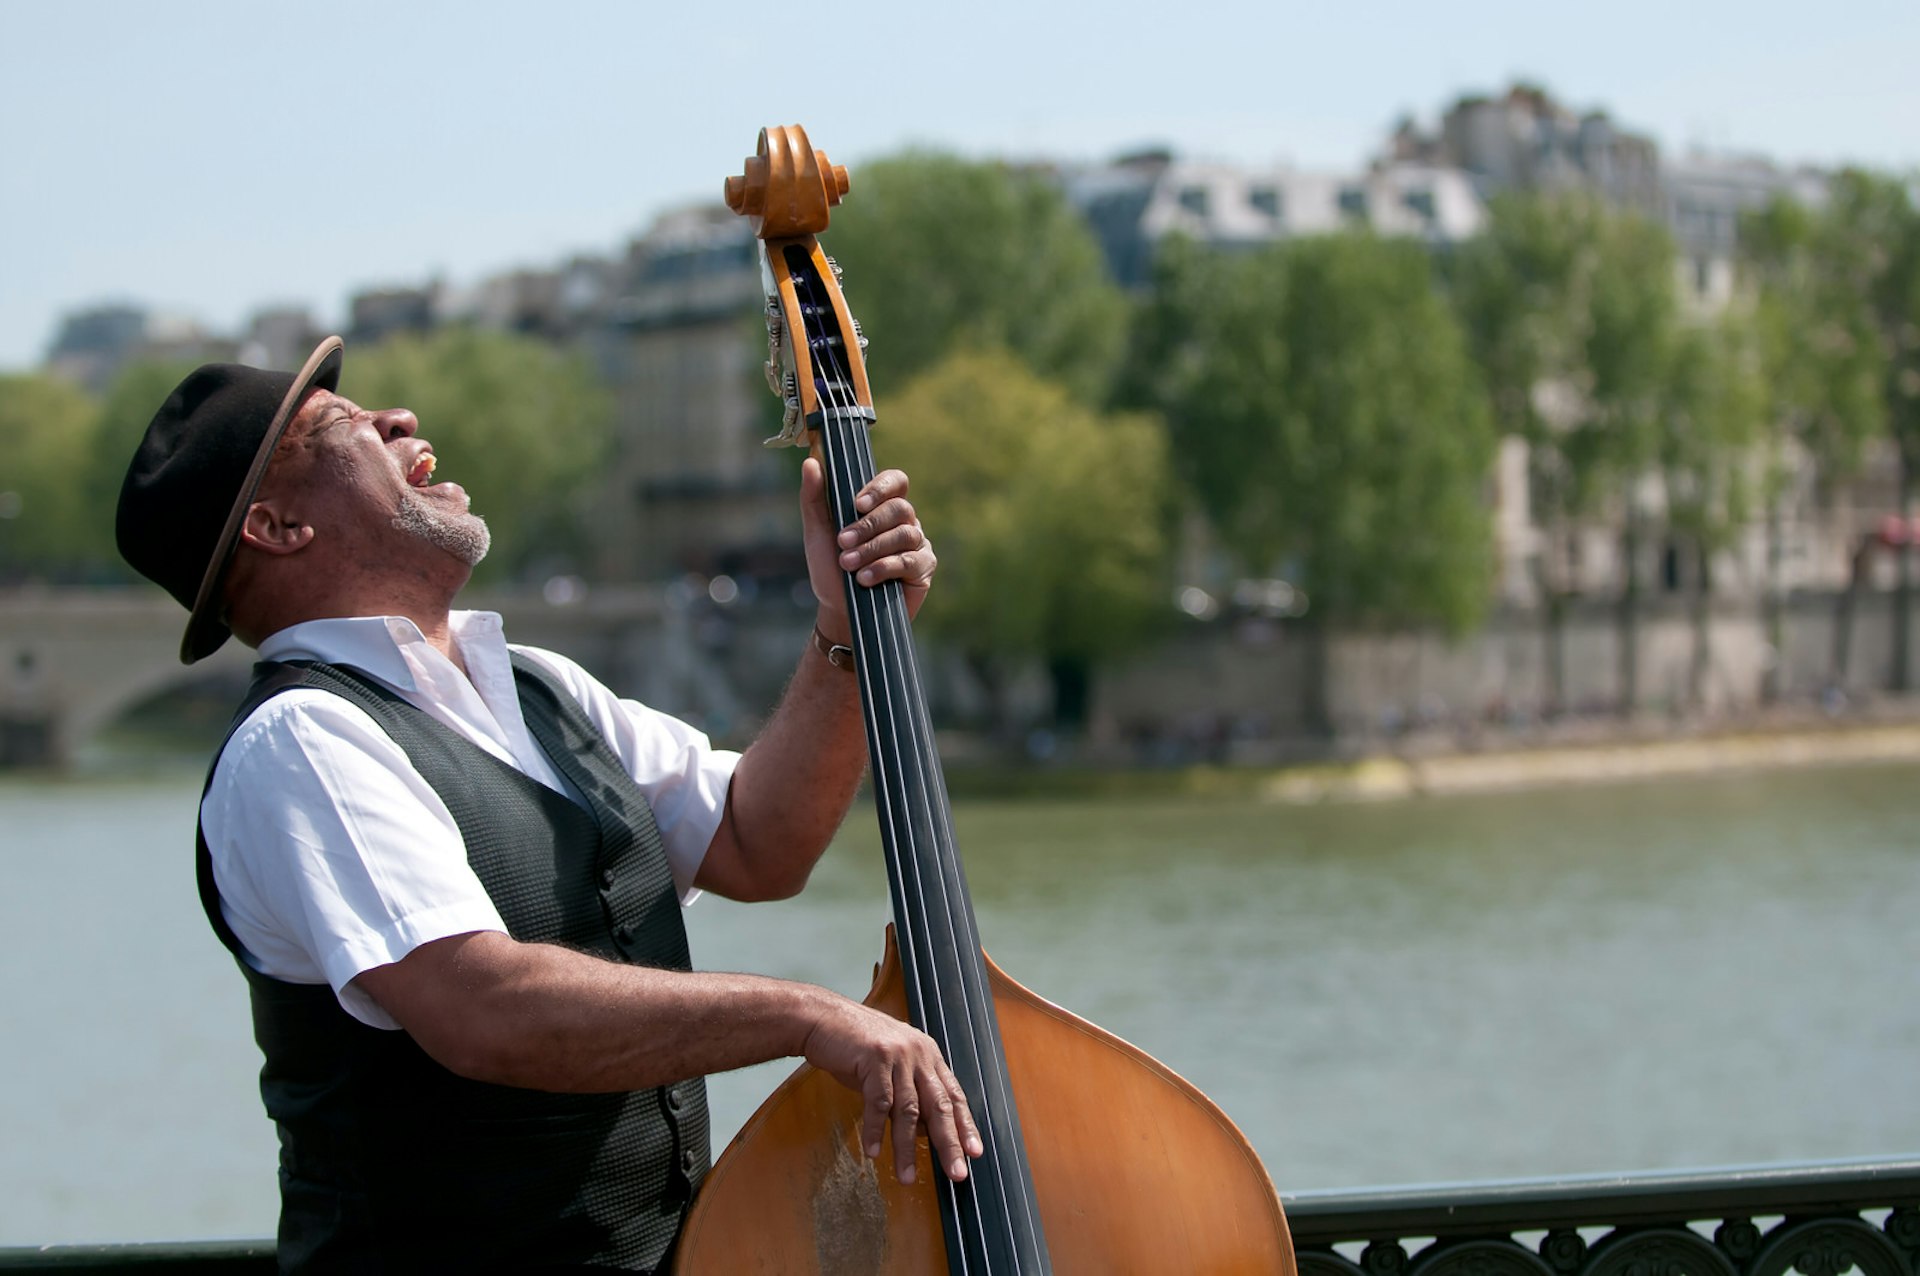 Wearing a trilby-style hat, a street artist playing a double bass has his head tilted back as he belts out a song - eyes closed. In the background is the River Seine. © Christian Rummel / Getty Images